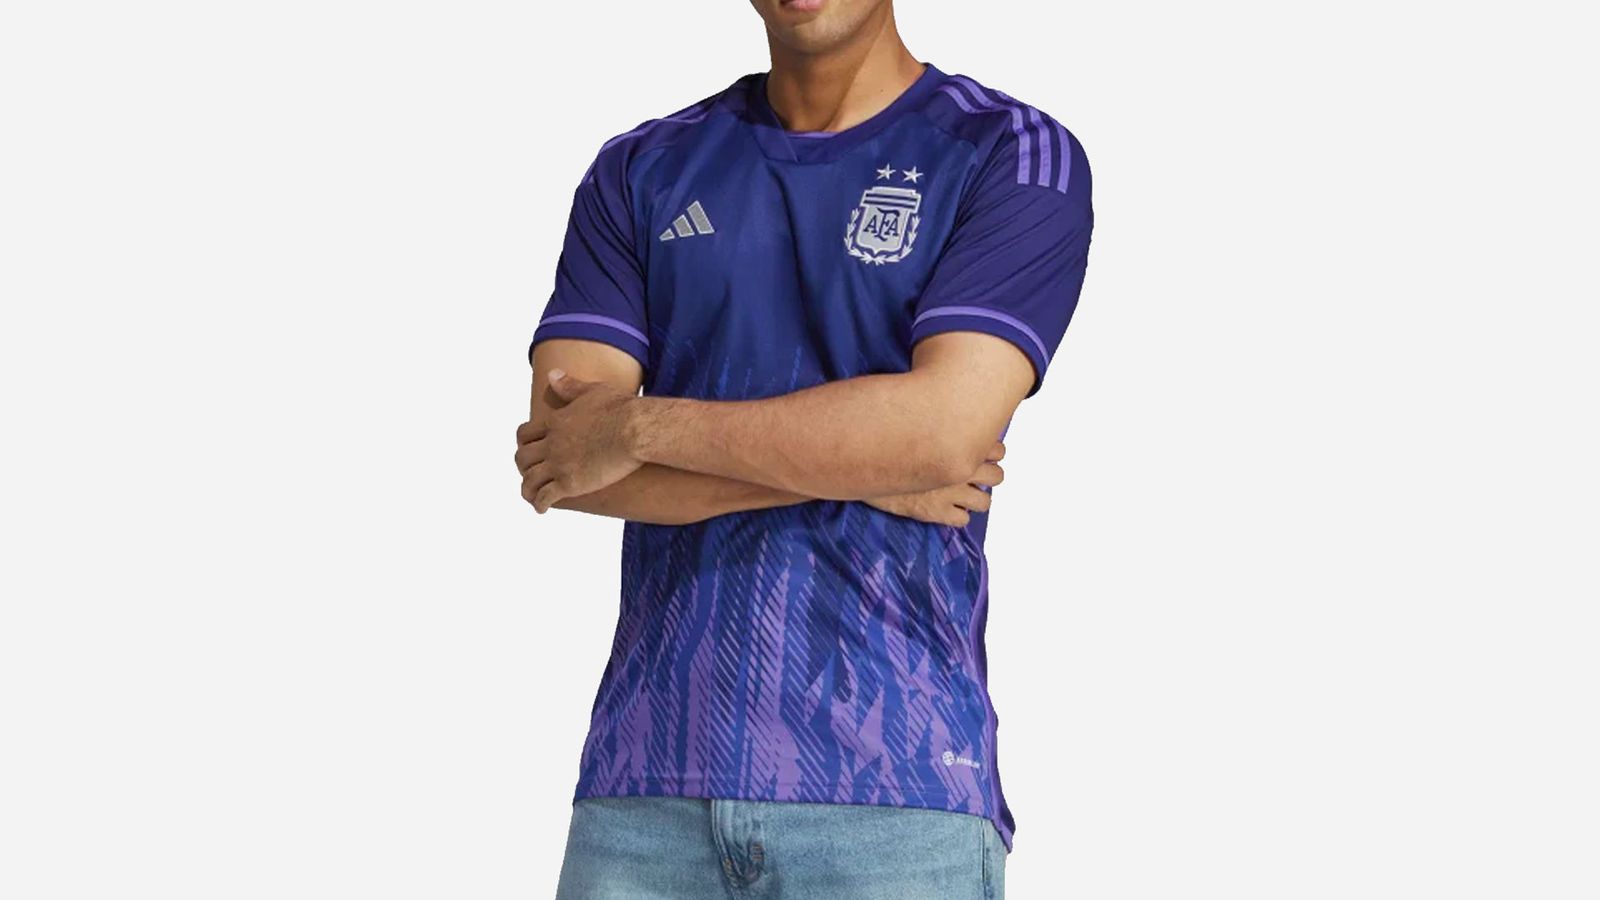 Argentina 2022 World Cup away kit adidas product image of a purple shirt with a faded lighter purple pattern towards the bottom.